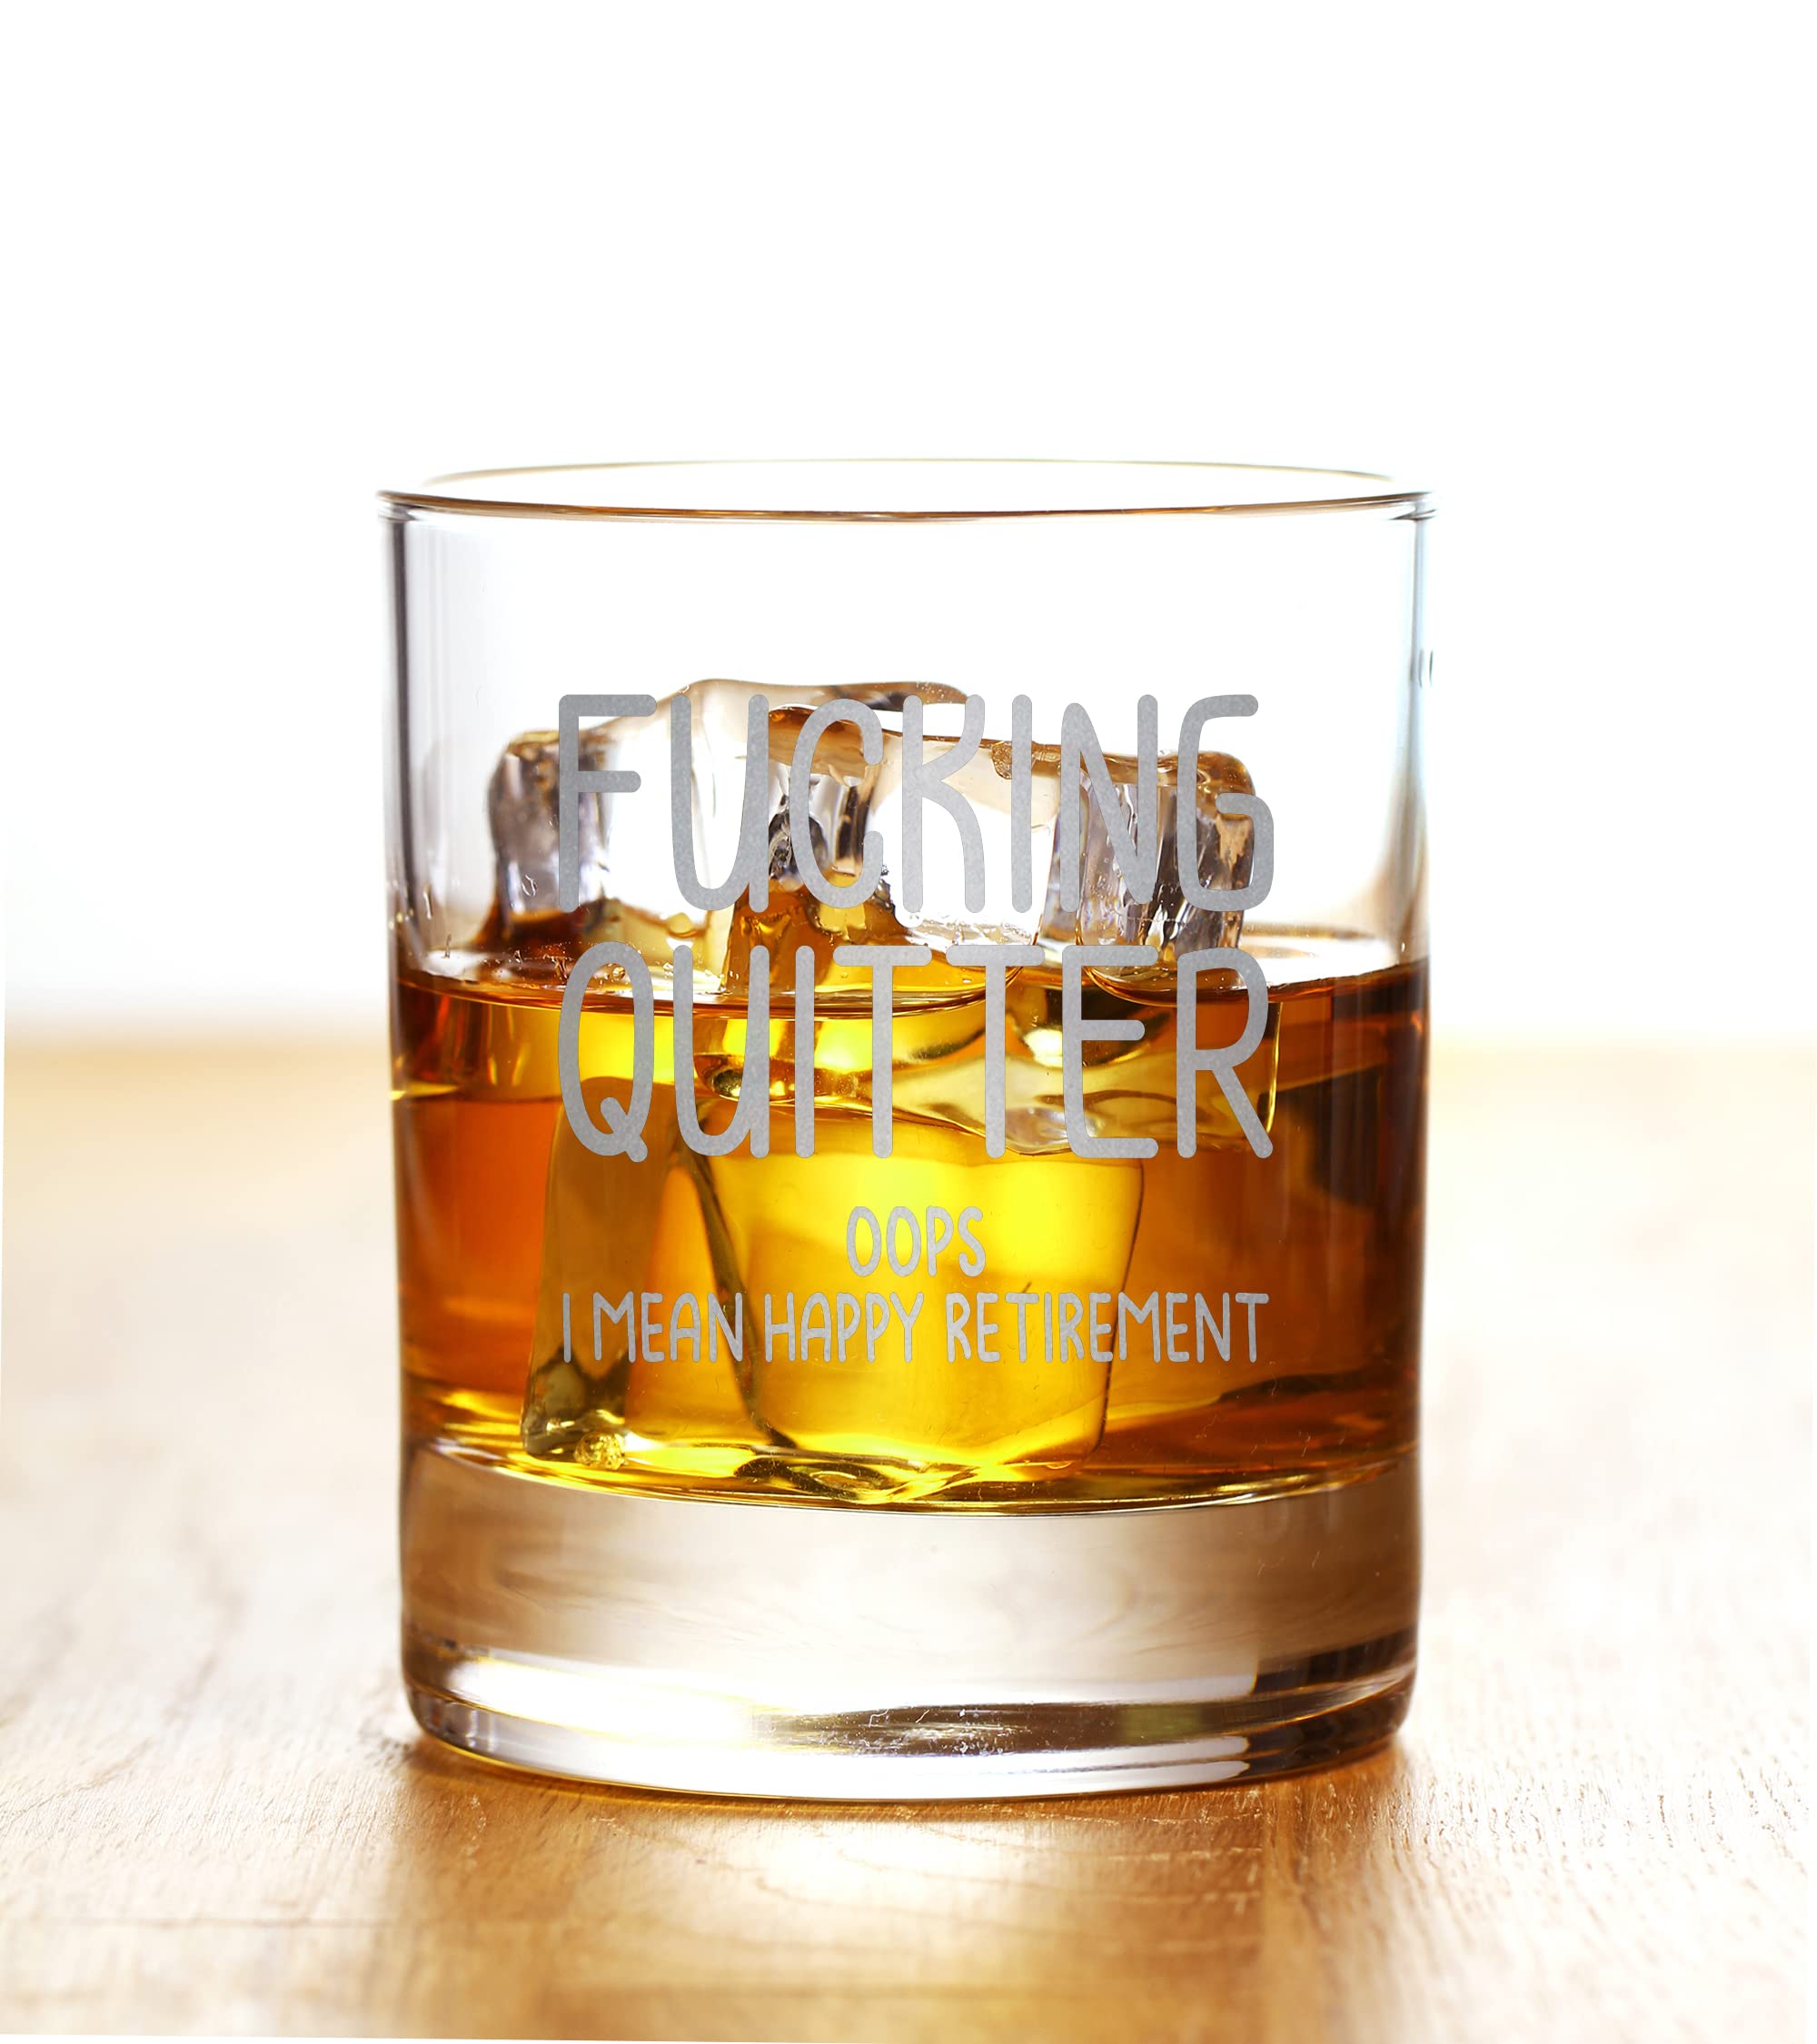 Promotion & Beyond Quitter Oops I Mean Happy Retirement Birthday Funny Gift For Friend Dad Uncle Grandpa From Daughter Son Wife - Father's Day Christmas Anniversary Party Favor Whiskey Glass